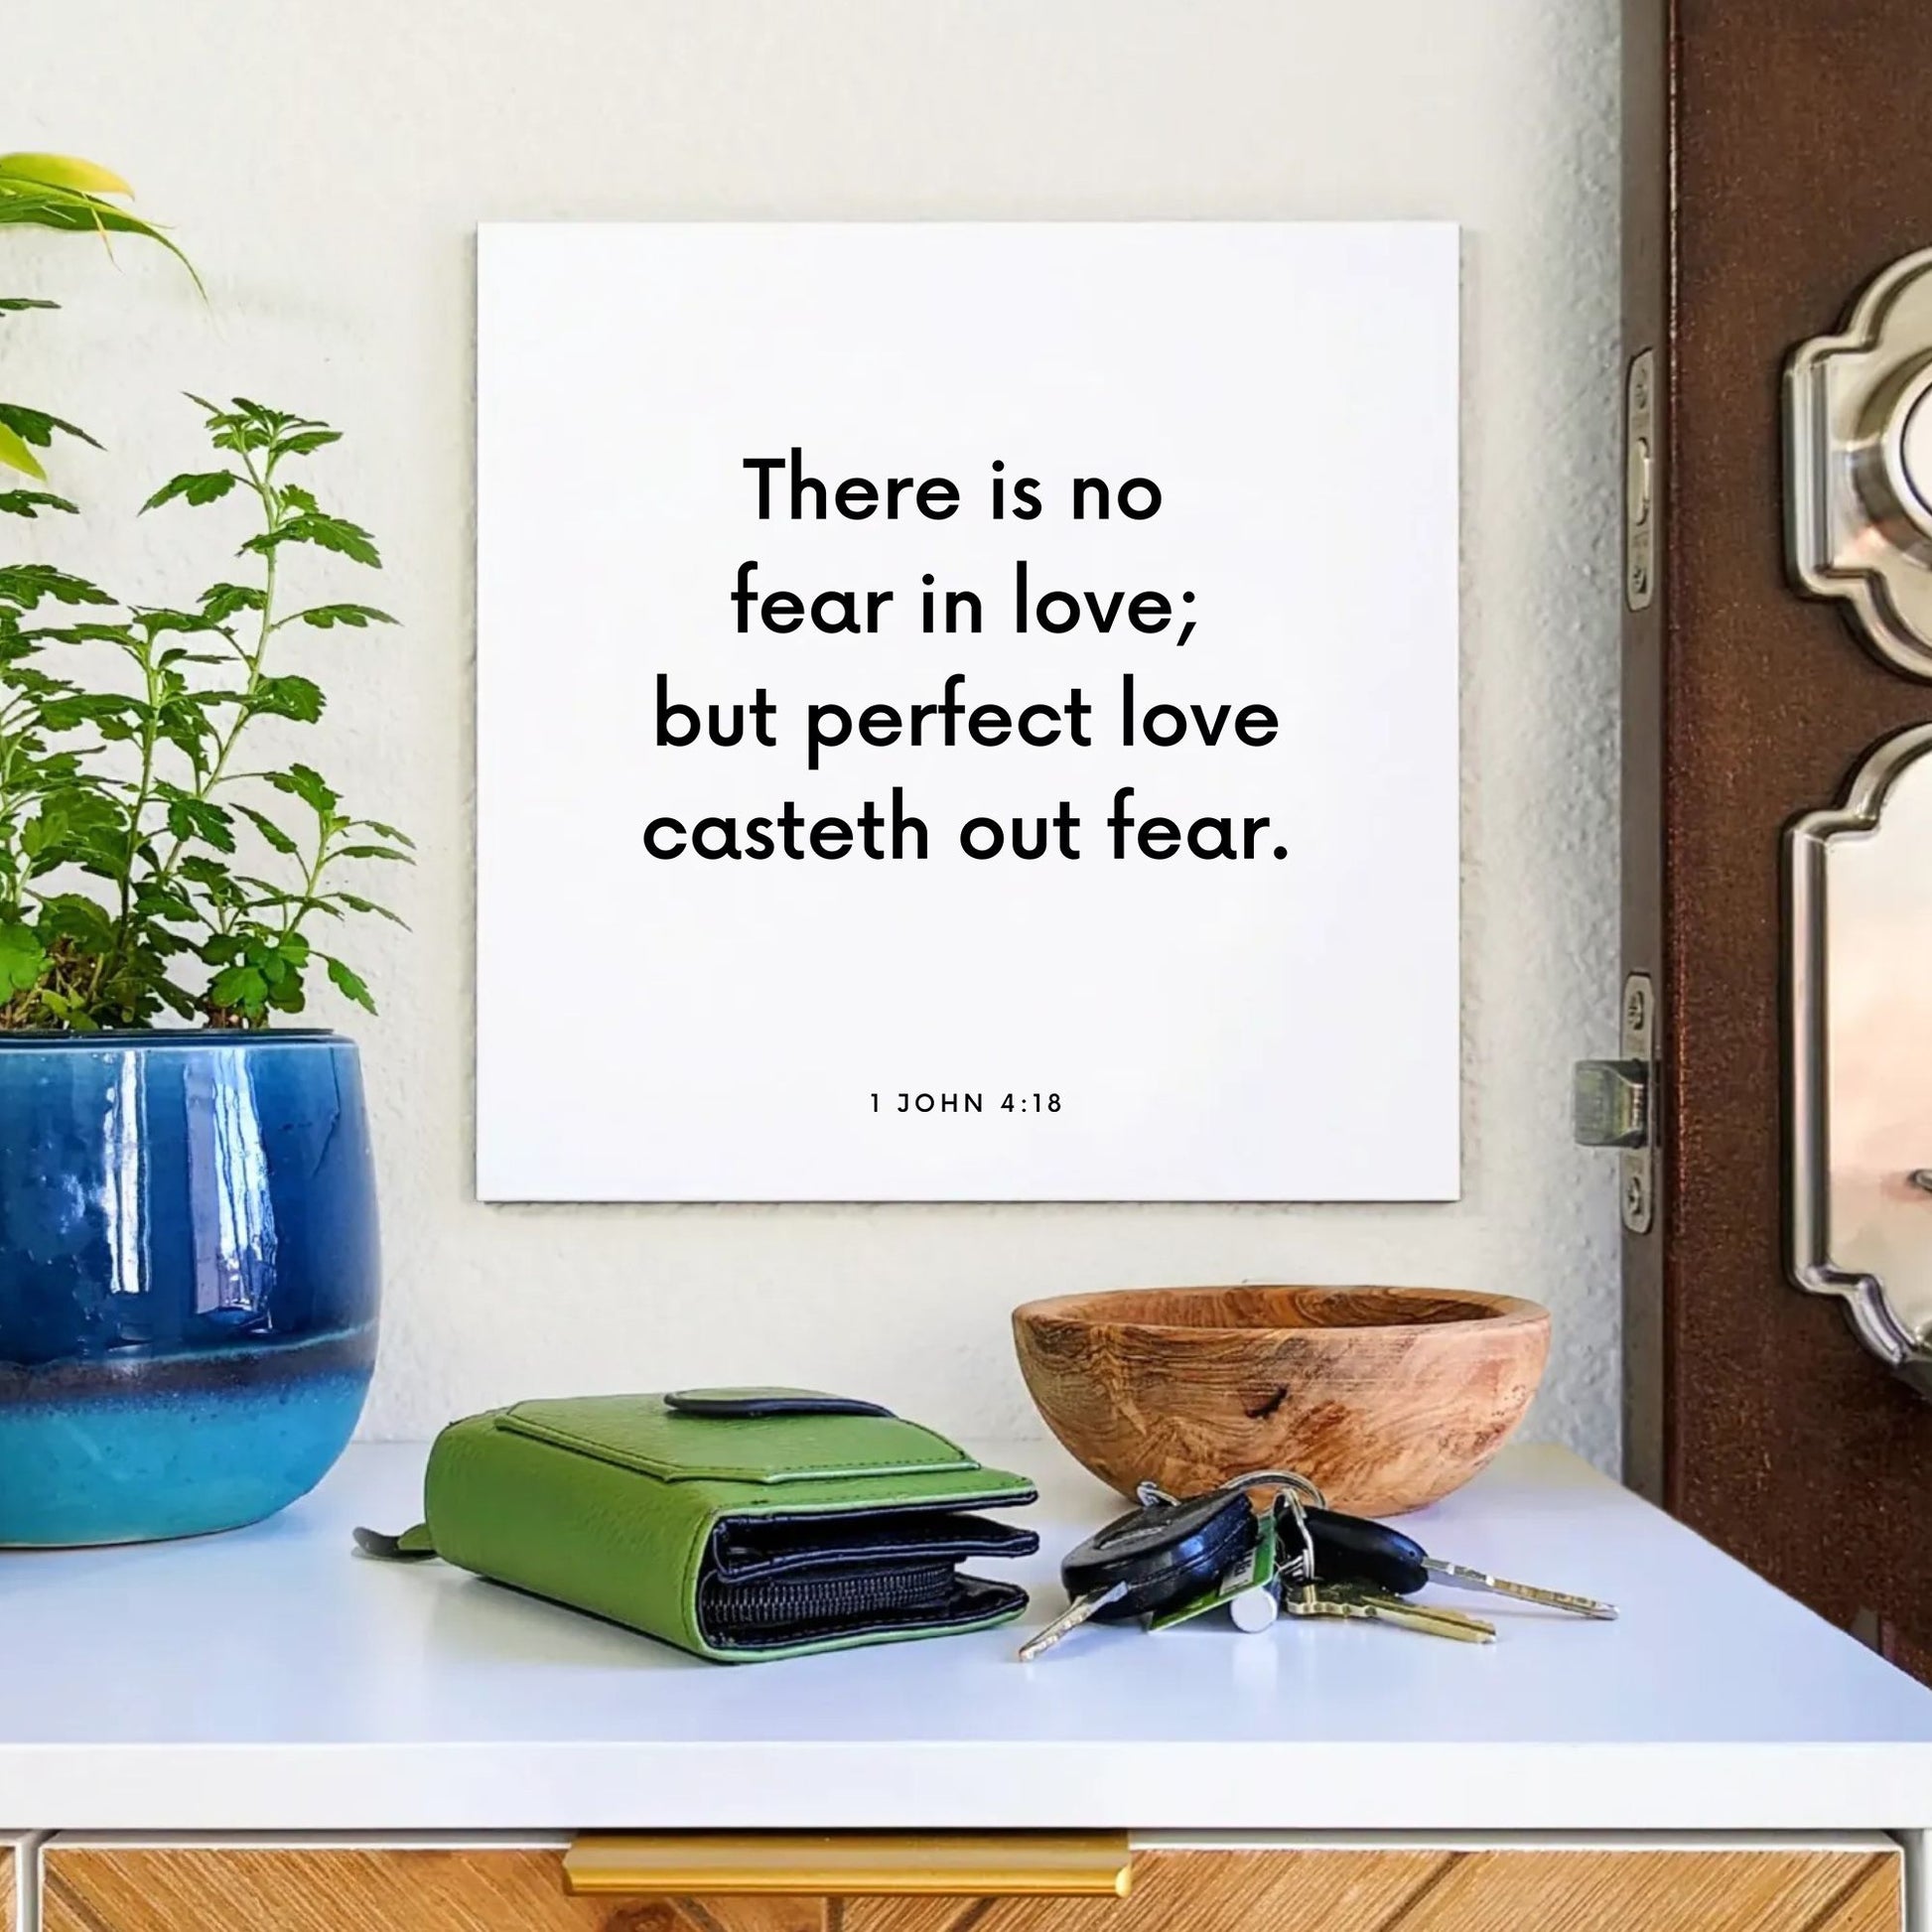 Entryway mouting of the scripture tile for 1 John 4:18 - "There is no fear in love; but perfect love casteth out fear"